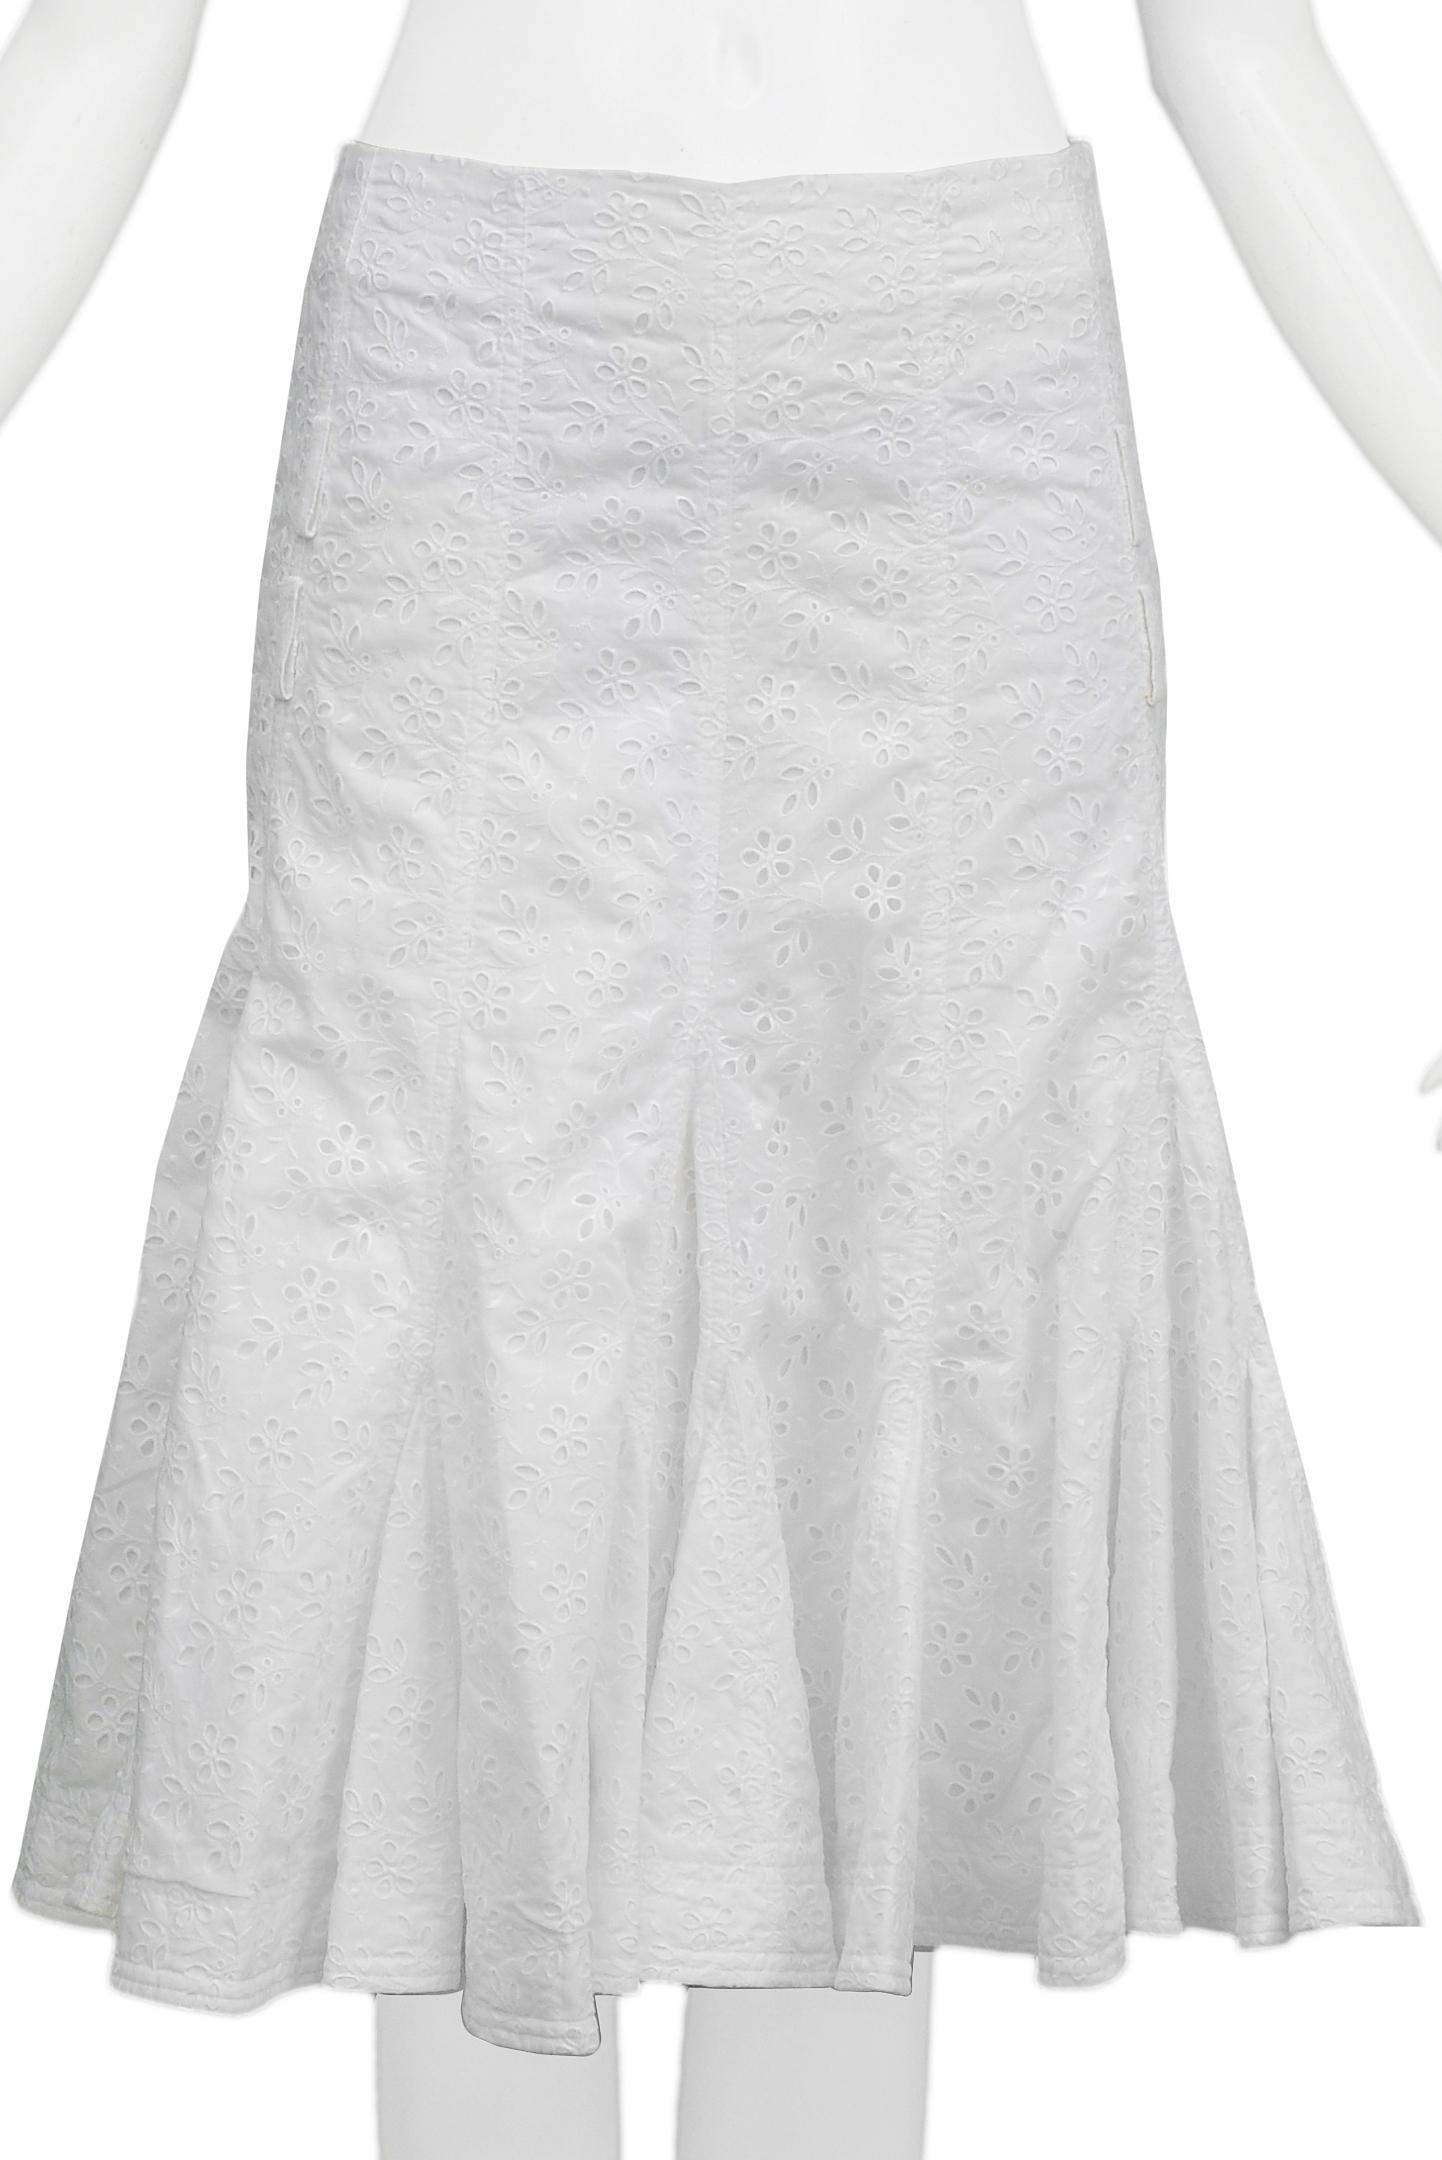 Dior White Eyelet Flare Skirt In Excellent Condition For Sale In Los Angeles, CA